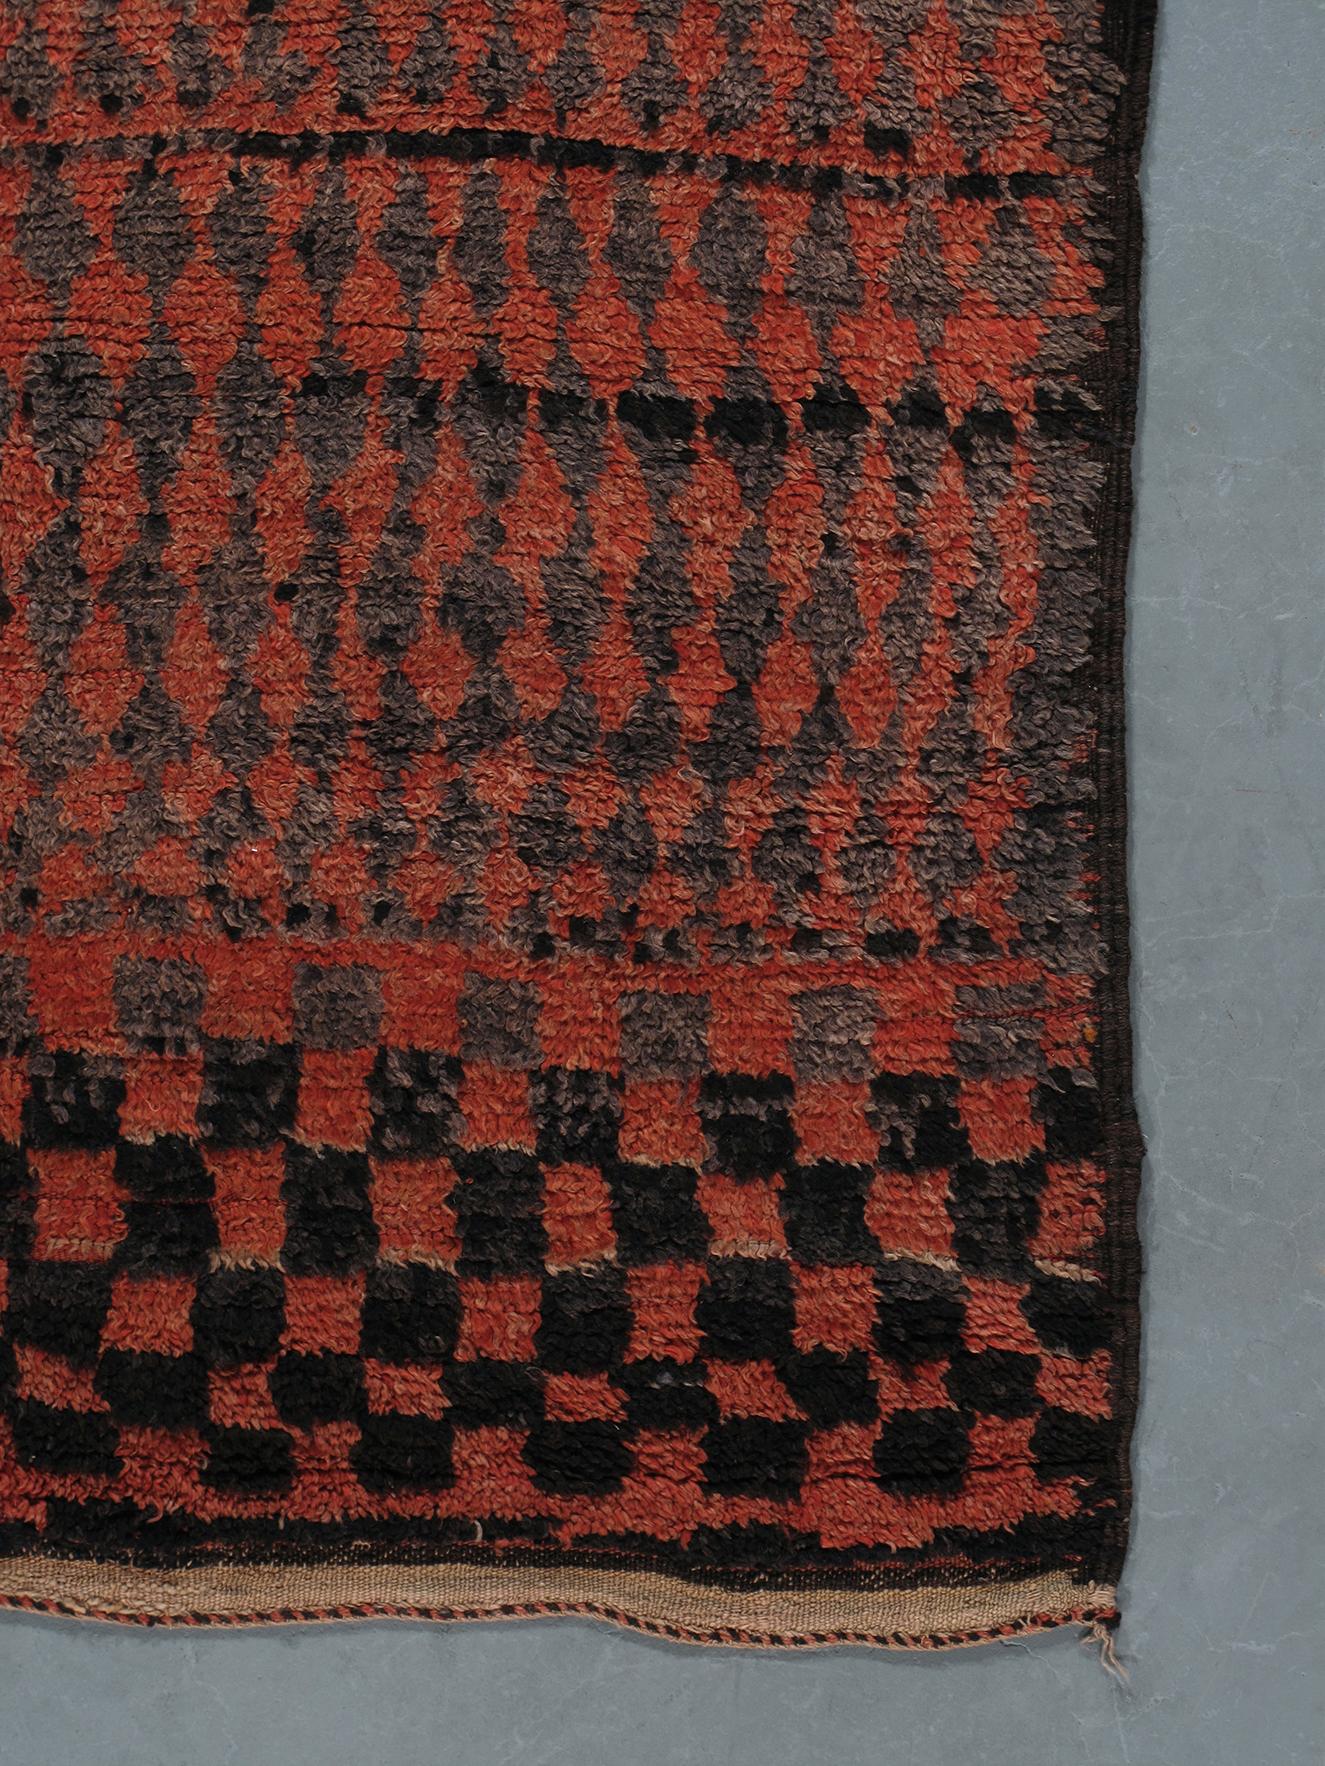 Hand-Knotted Vintage Moroccan Berber Hand Knotted Rug in Red and Black Checkered Design For Sale